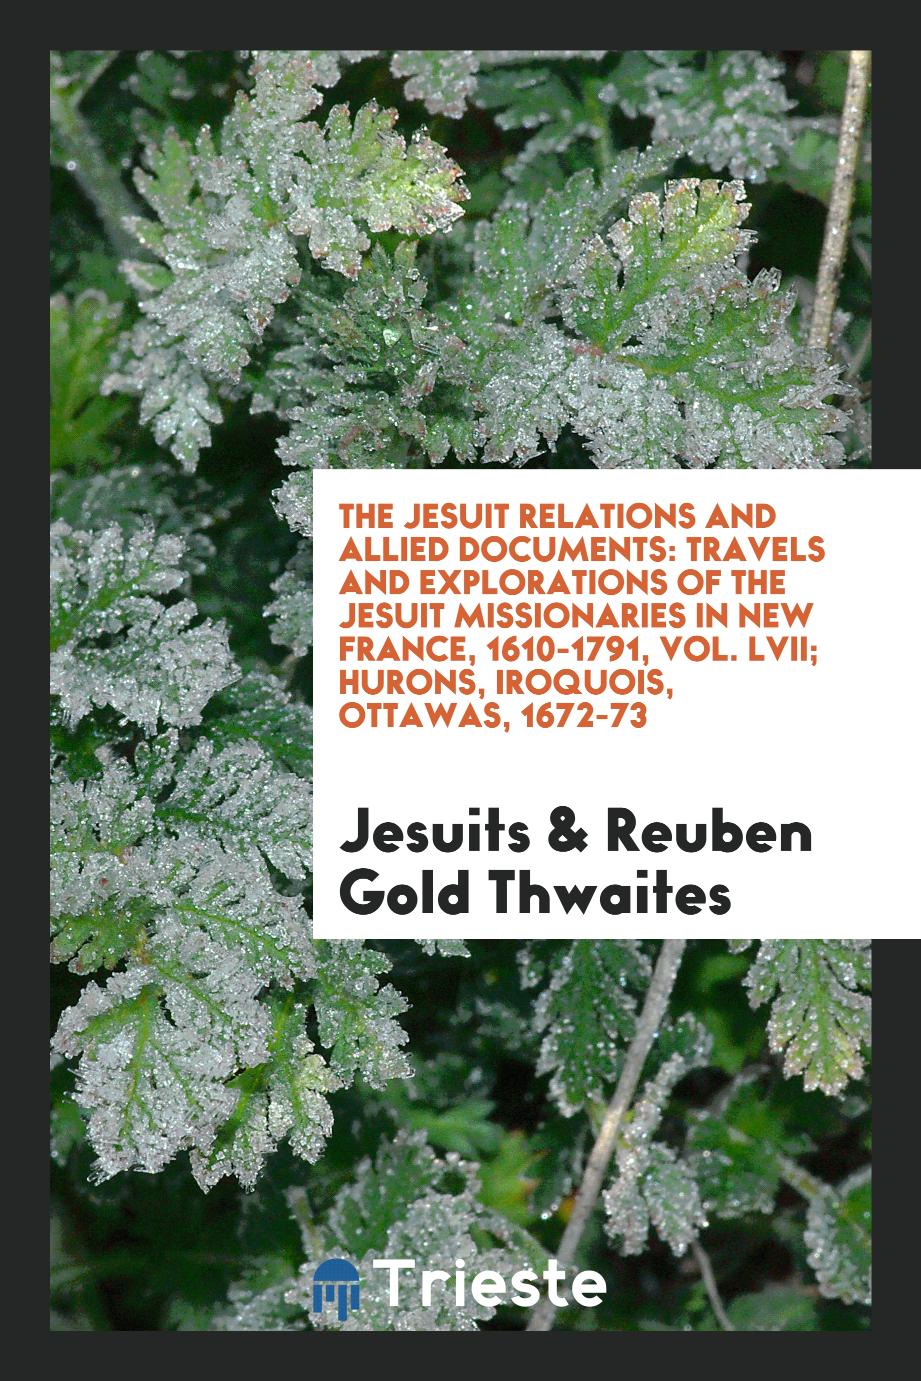 The Jesuit Relations and Allied Documents: Travels and Explorations of the Jesuit Missionaries in New France, 1610-1791, Vol. LVII; Hurons, Iroquois, Ottawas, 1672-73